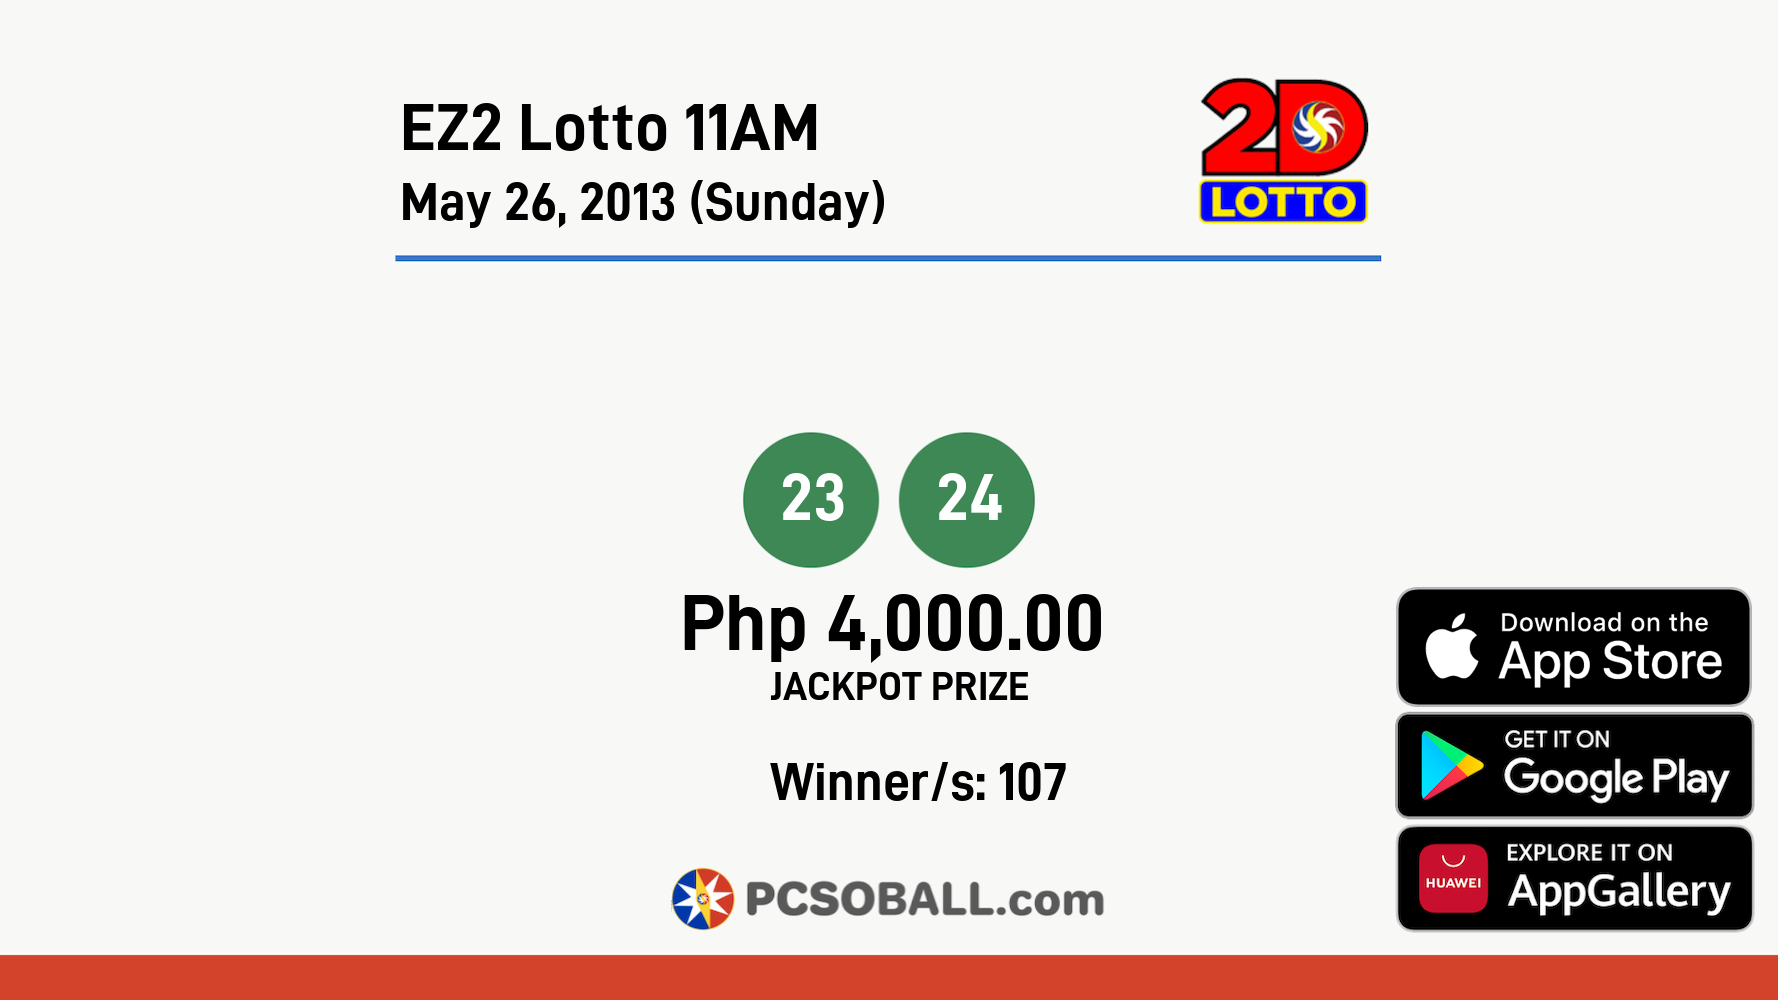 EZ2 Lotto 11AM May 26, 2013 (Sunday) Result